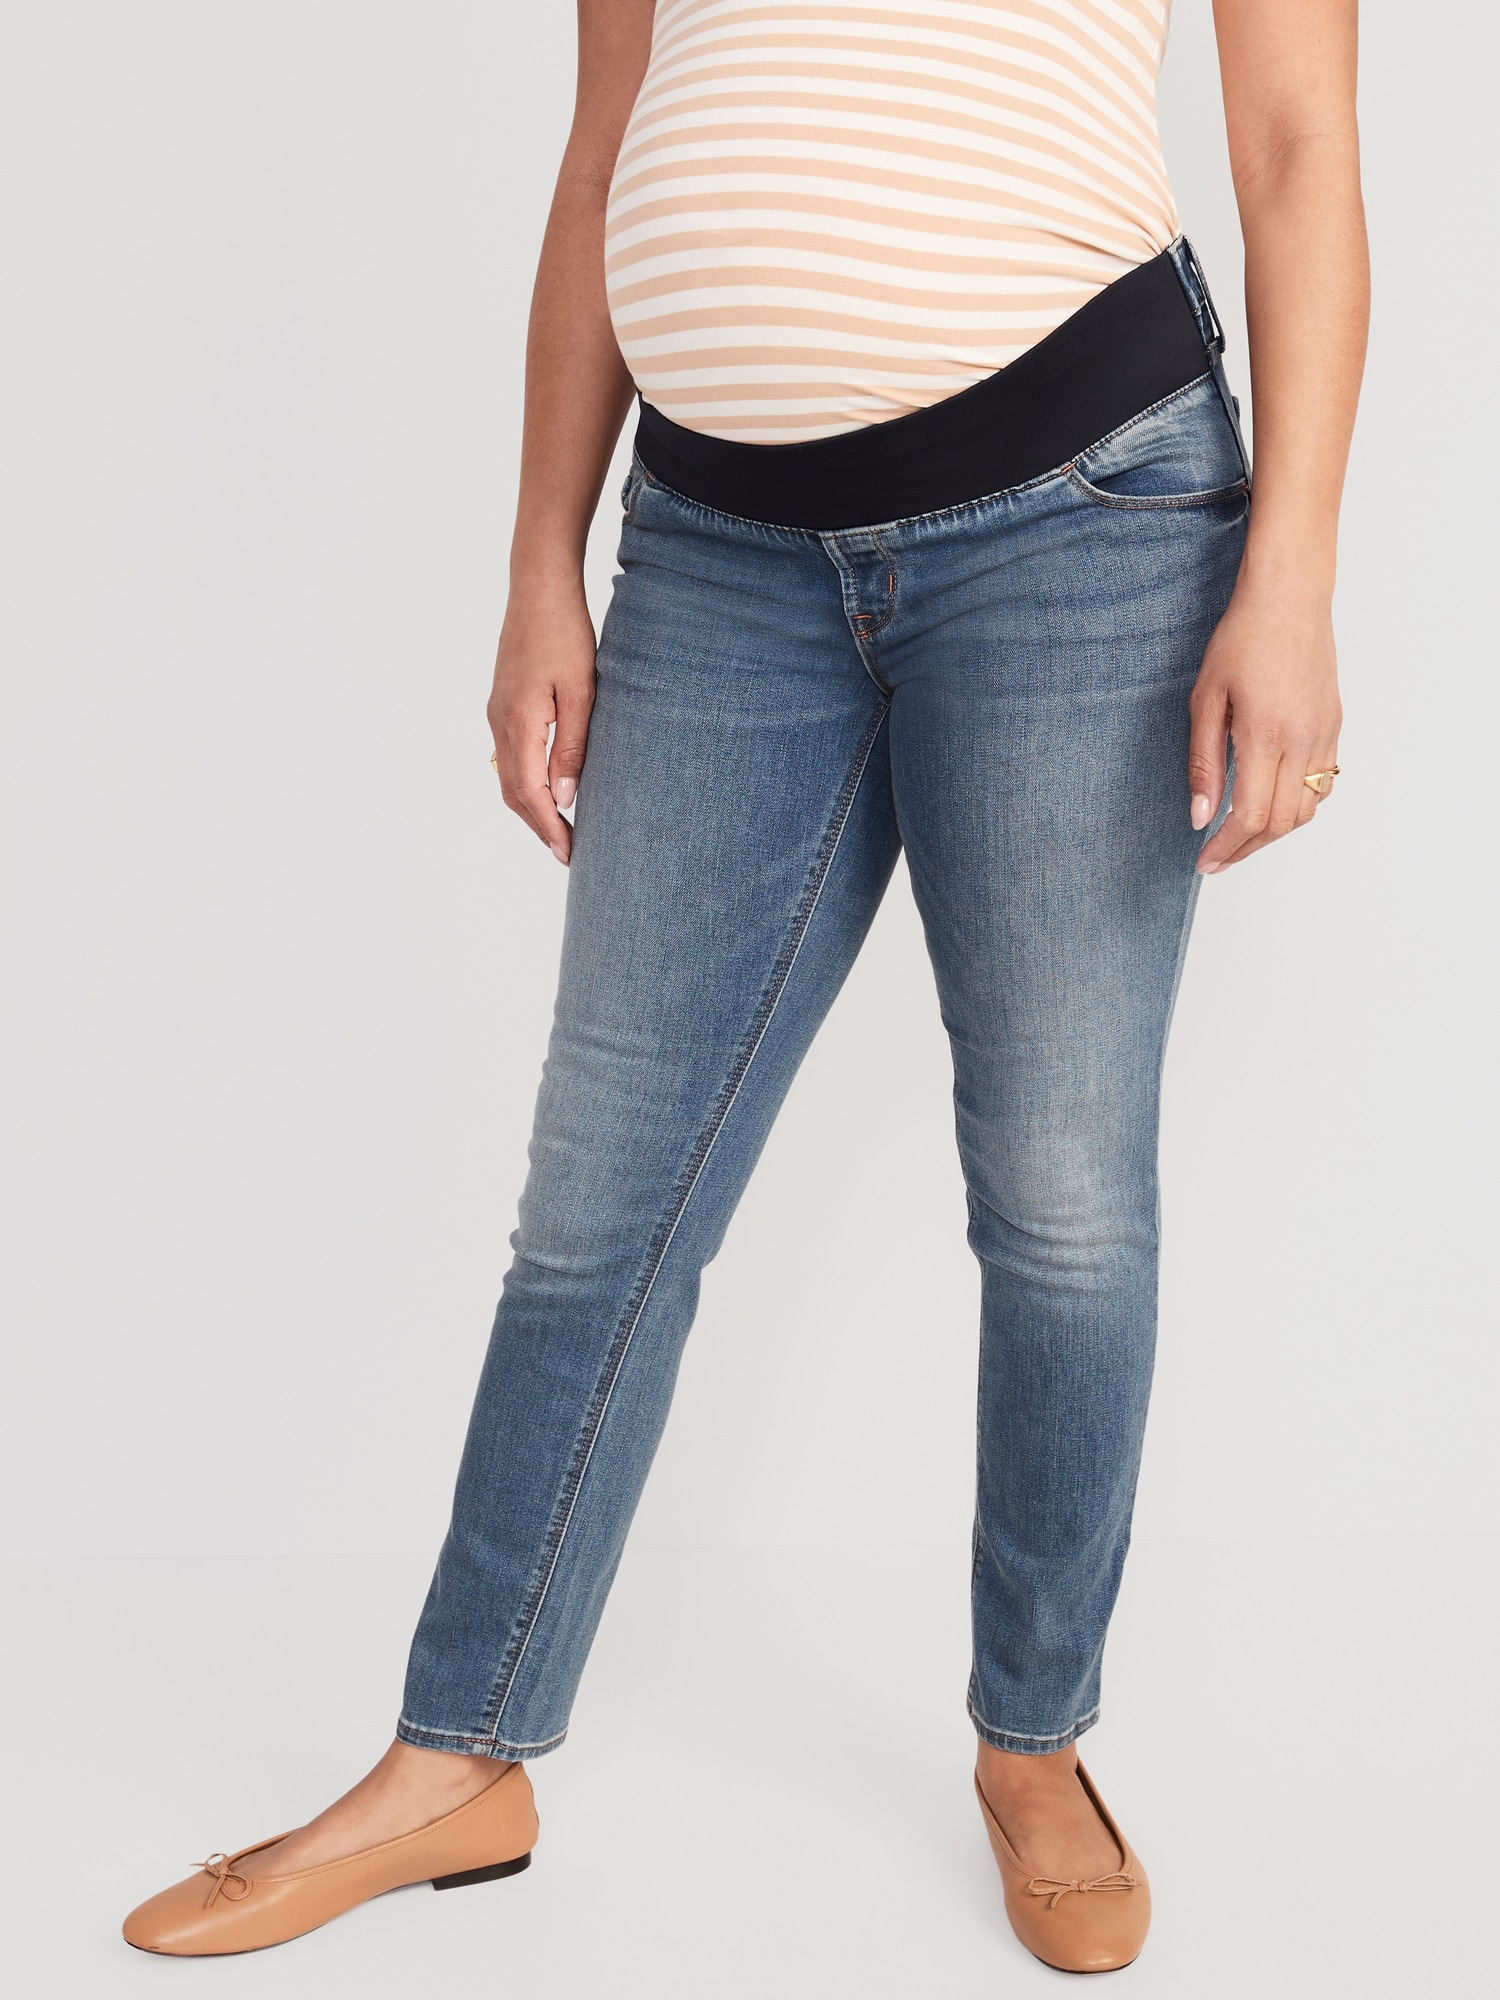 Maternity Front Low Panel OG Straight Jean Shorts -- 5-inch inseam